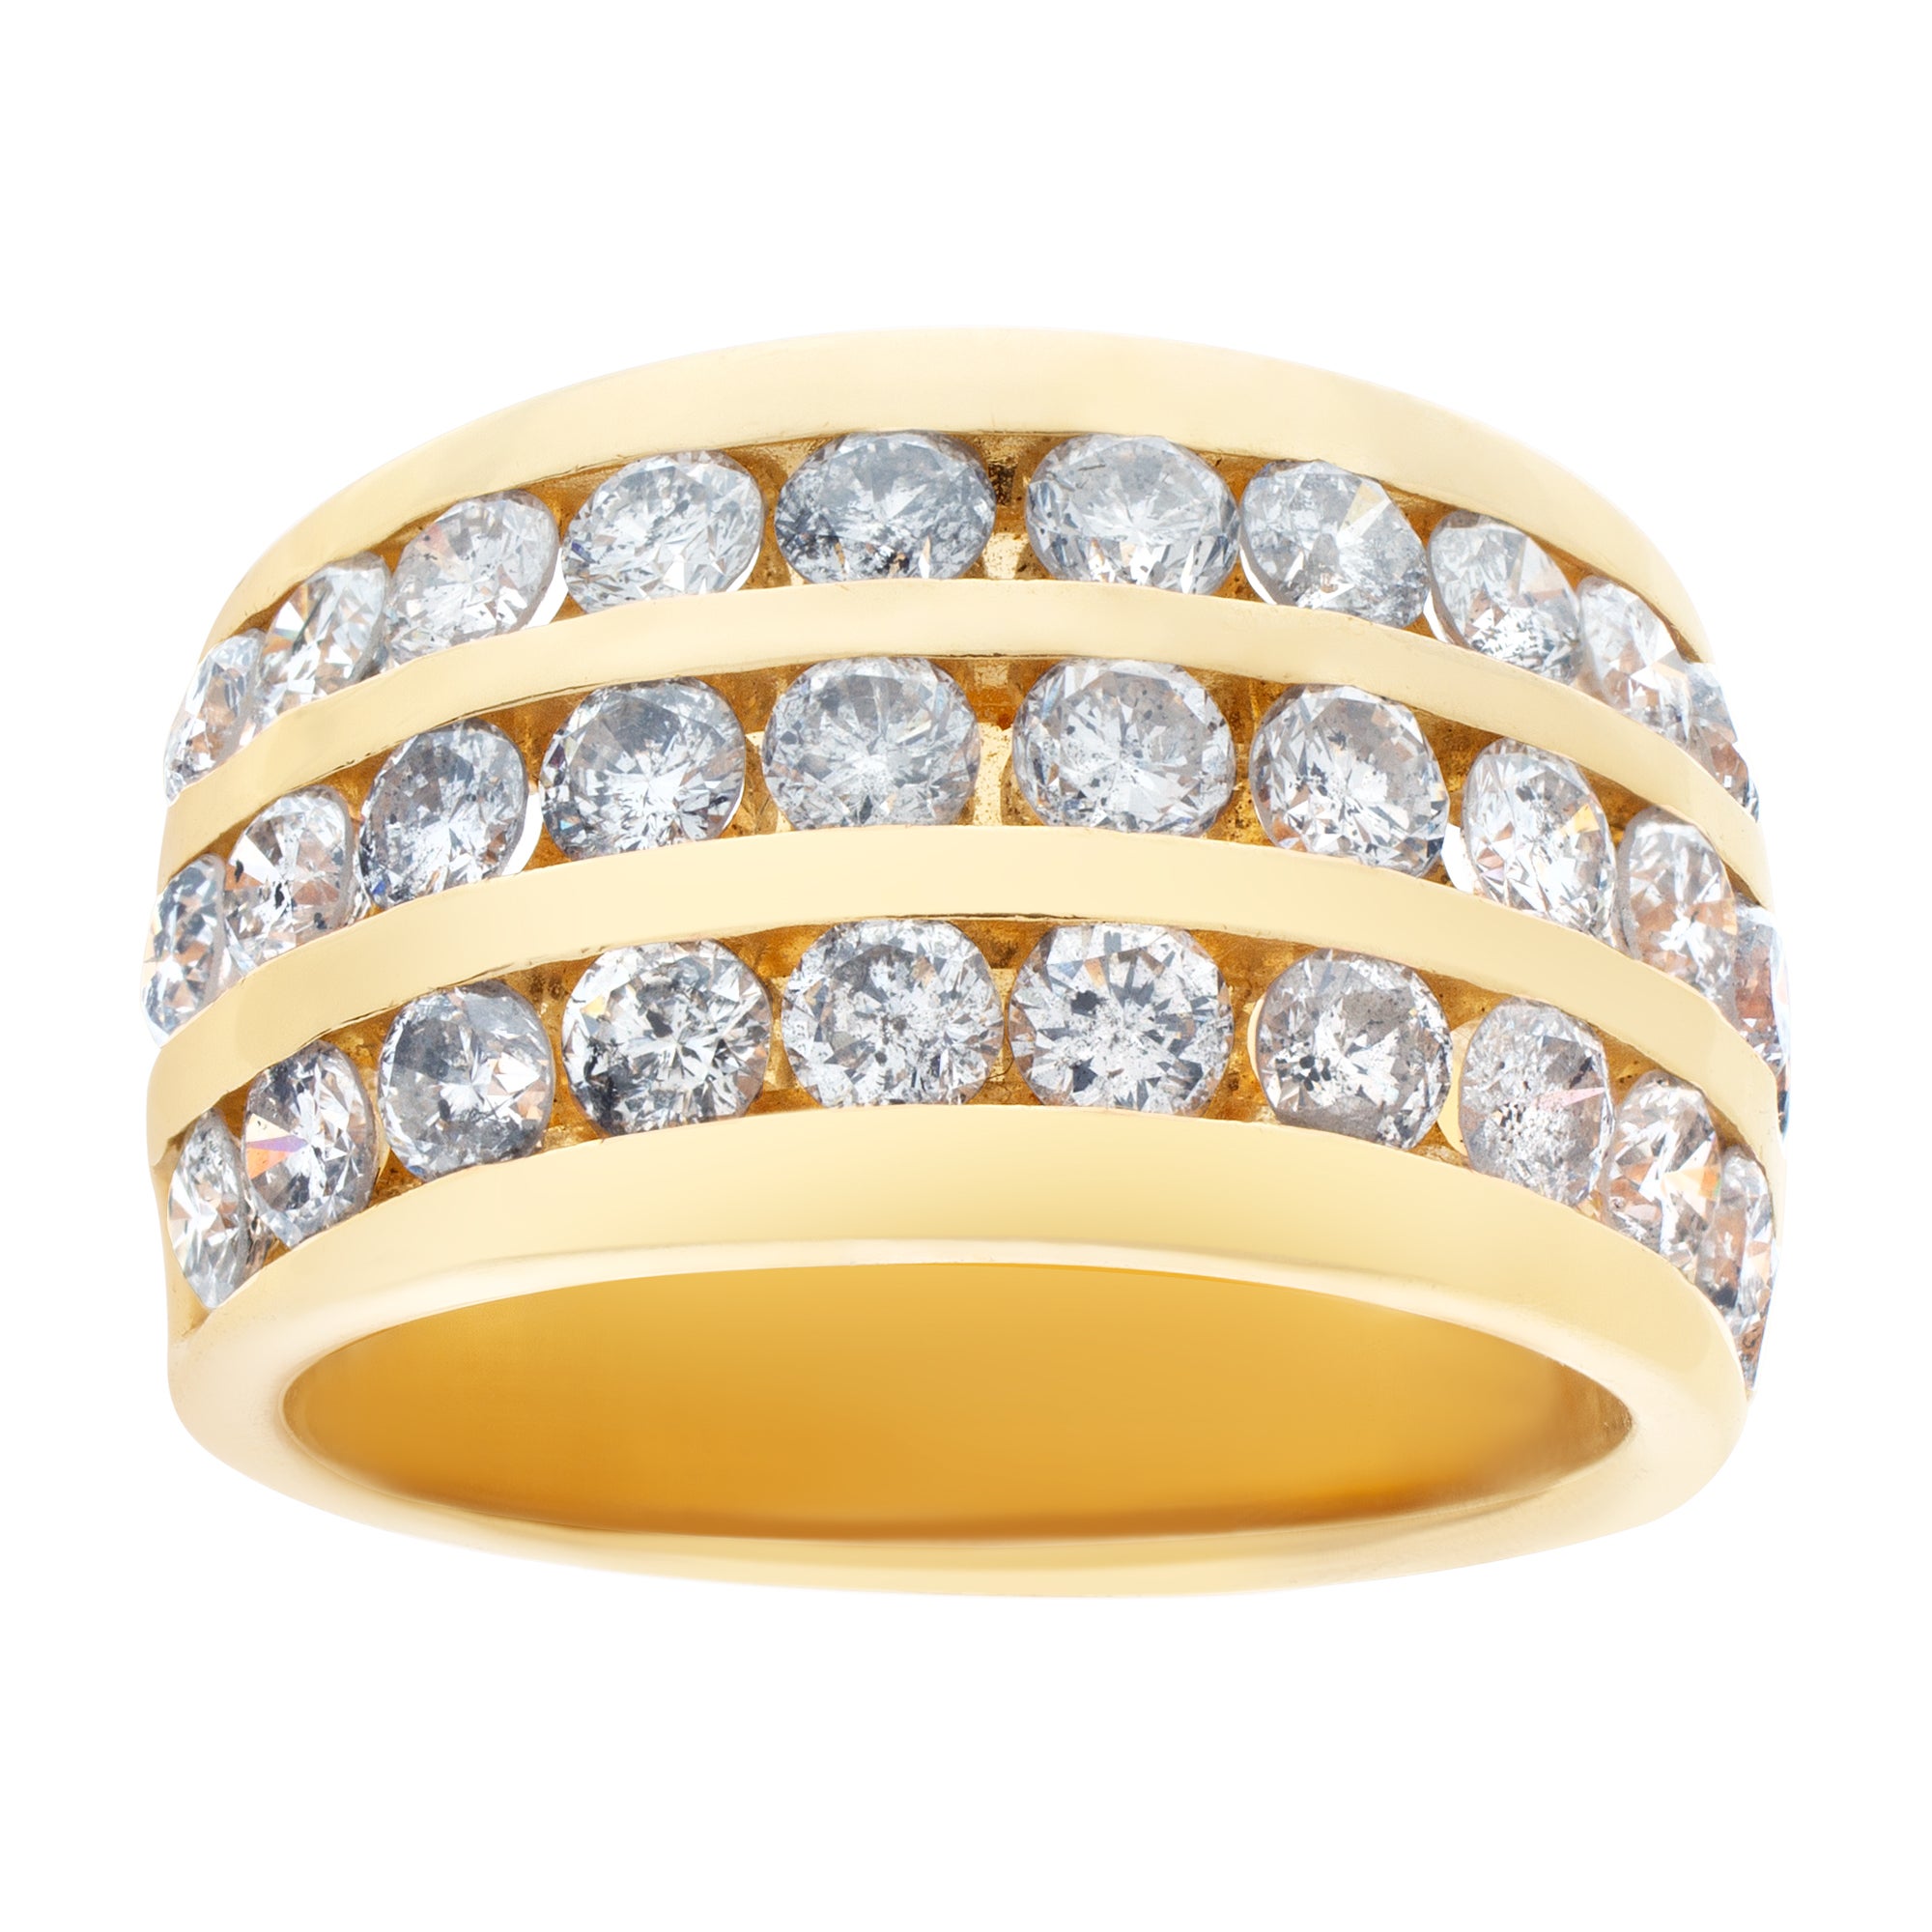 Ring Band in 14k Yellow Gold, 1.50 Carats in 3 Rows of Channel Set Diamonds For Sale